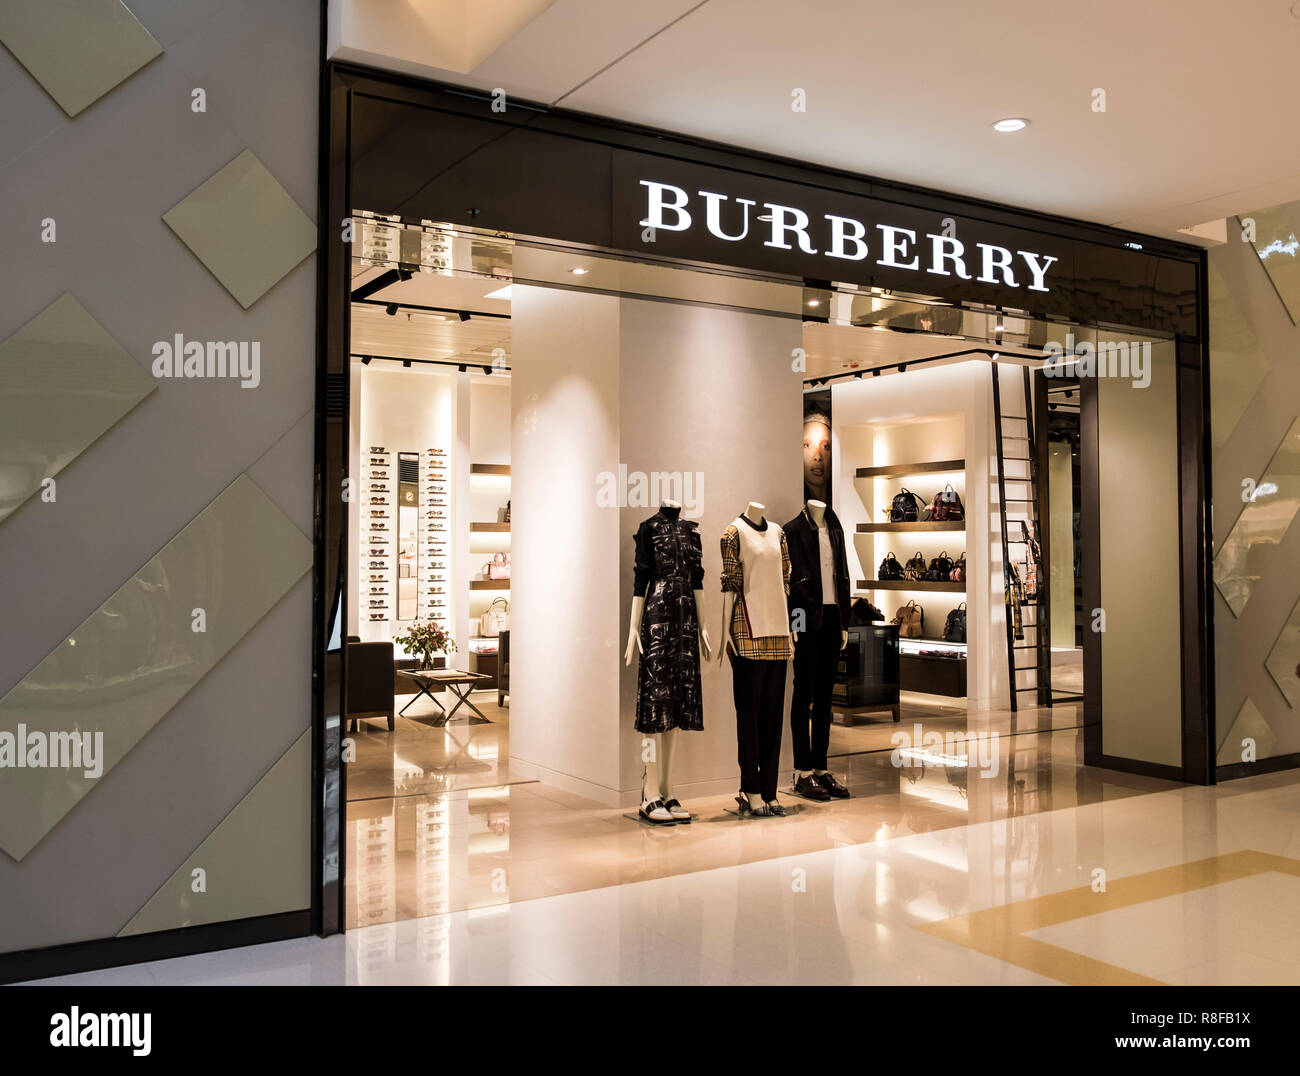 Total 81+ imagen burberry store king of prussia mall - Abzlocal.mx